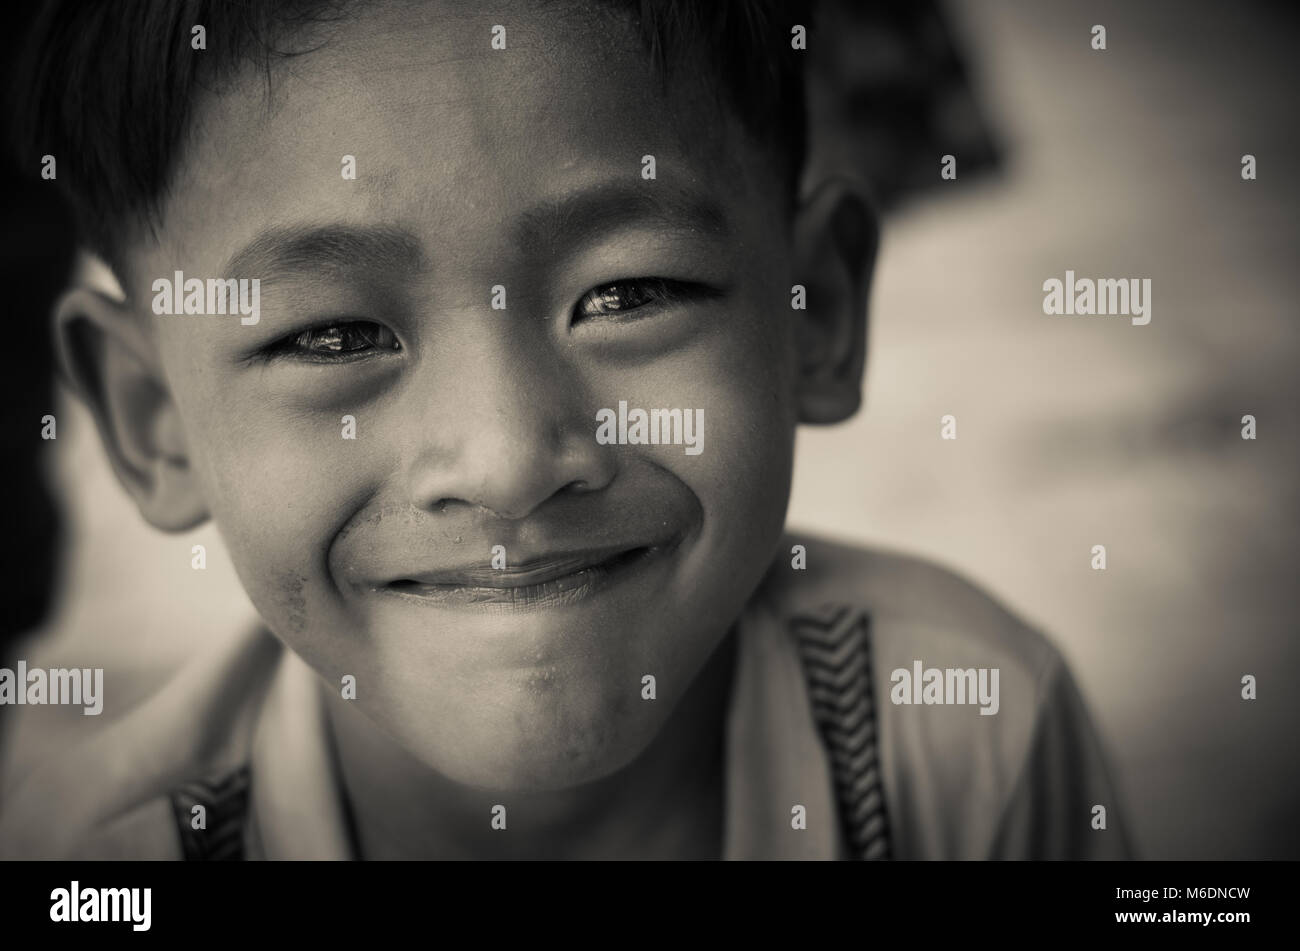 SIEM REAP, CAMBODIA - MAY 2 : Closeup face og Unidentified boy of Cambodian at kabal spean on May 2, 2015 in Siem Reap, Cambodia Stock Photo